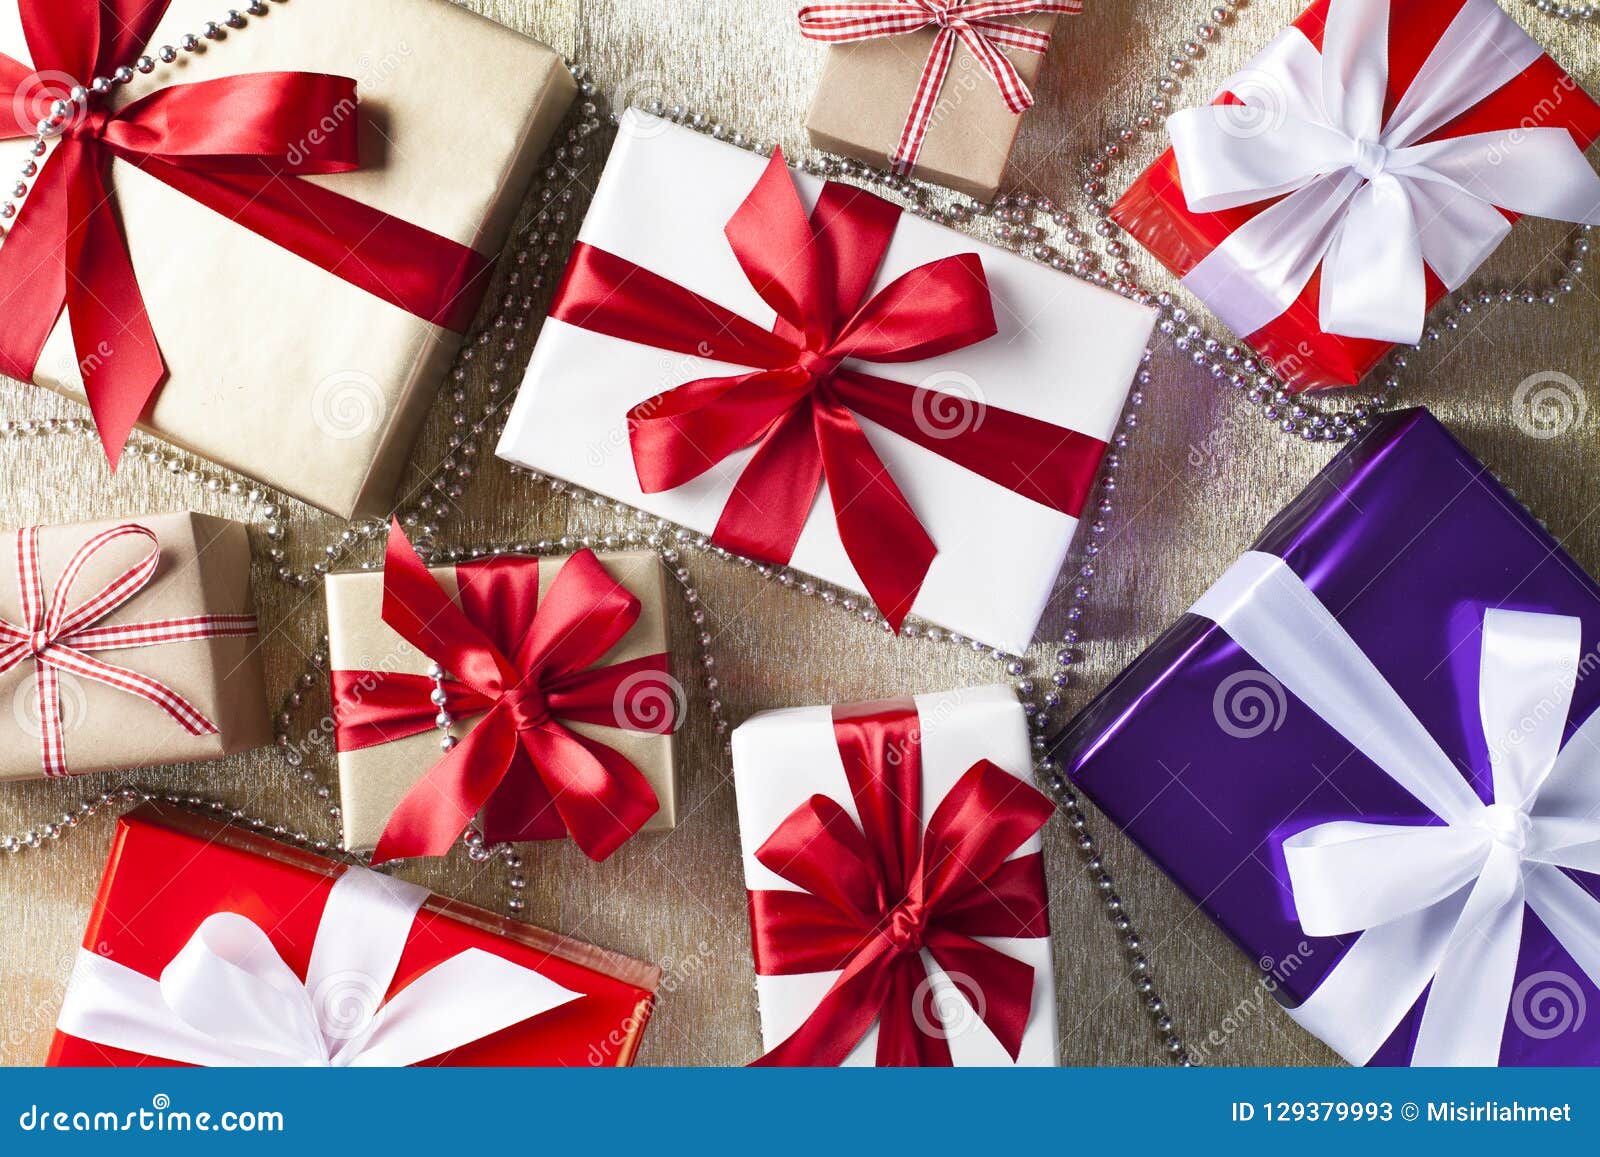 Gift boxes top view stock image. Image of celebration - 129379993